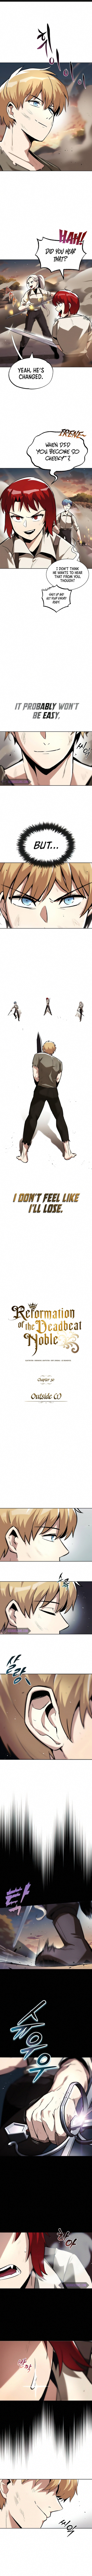 reformation-of-the-deadbeat-noble-chap-30-1